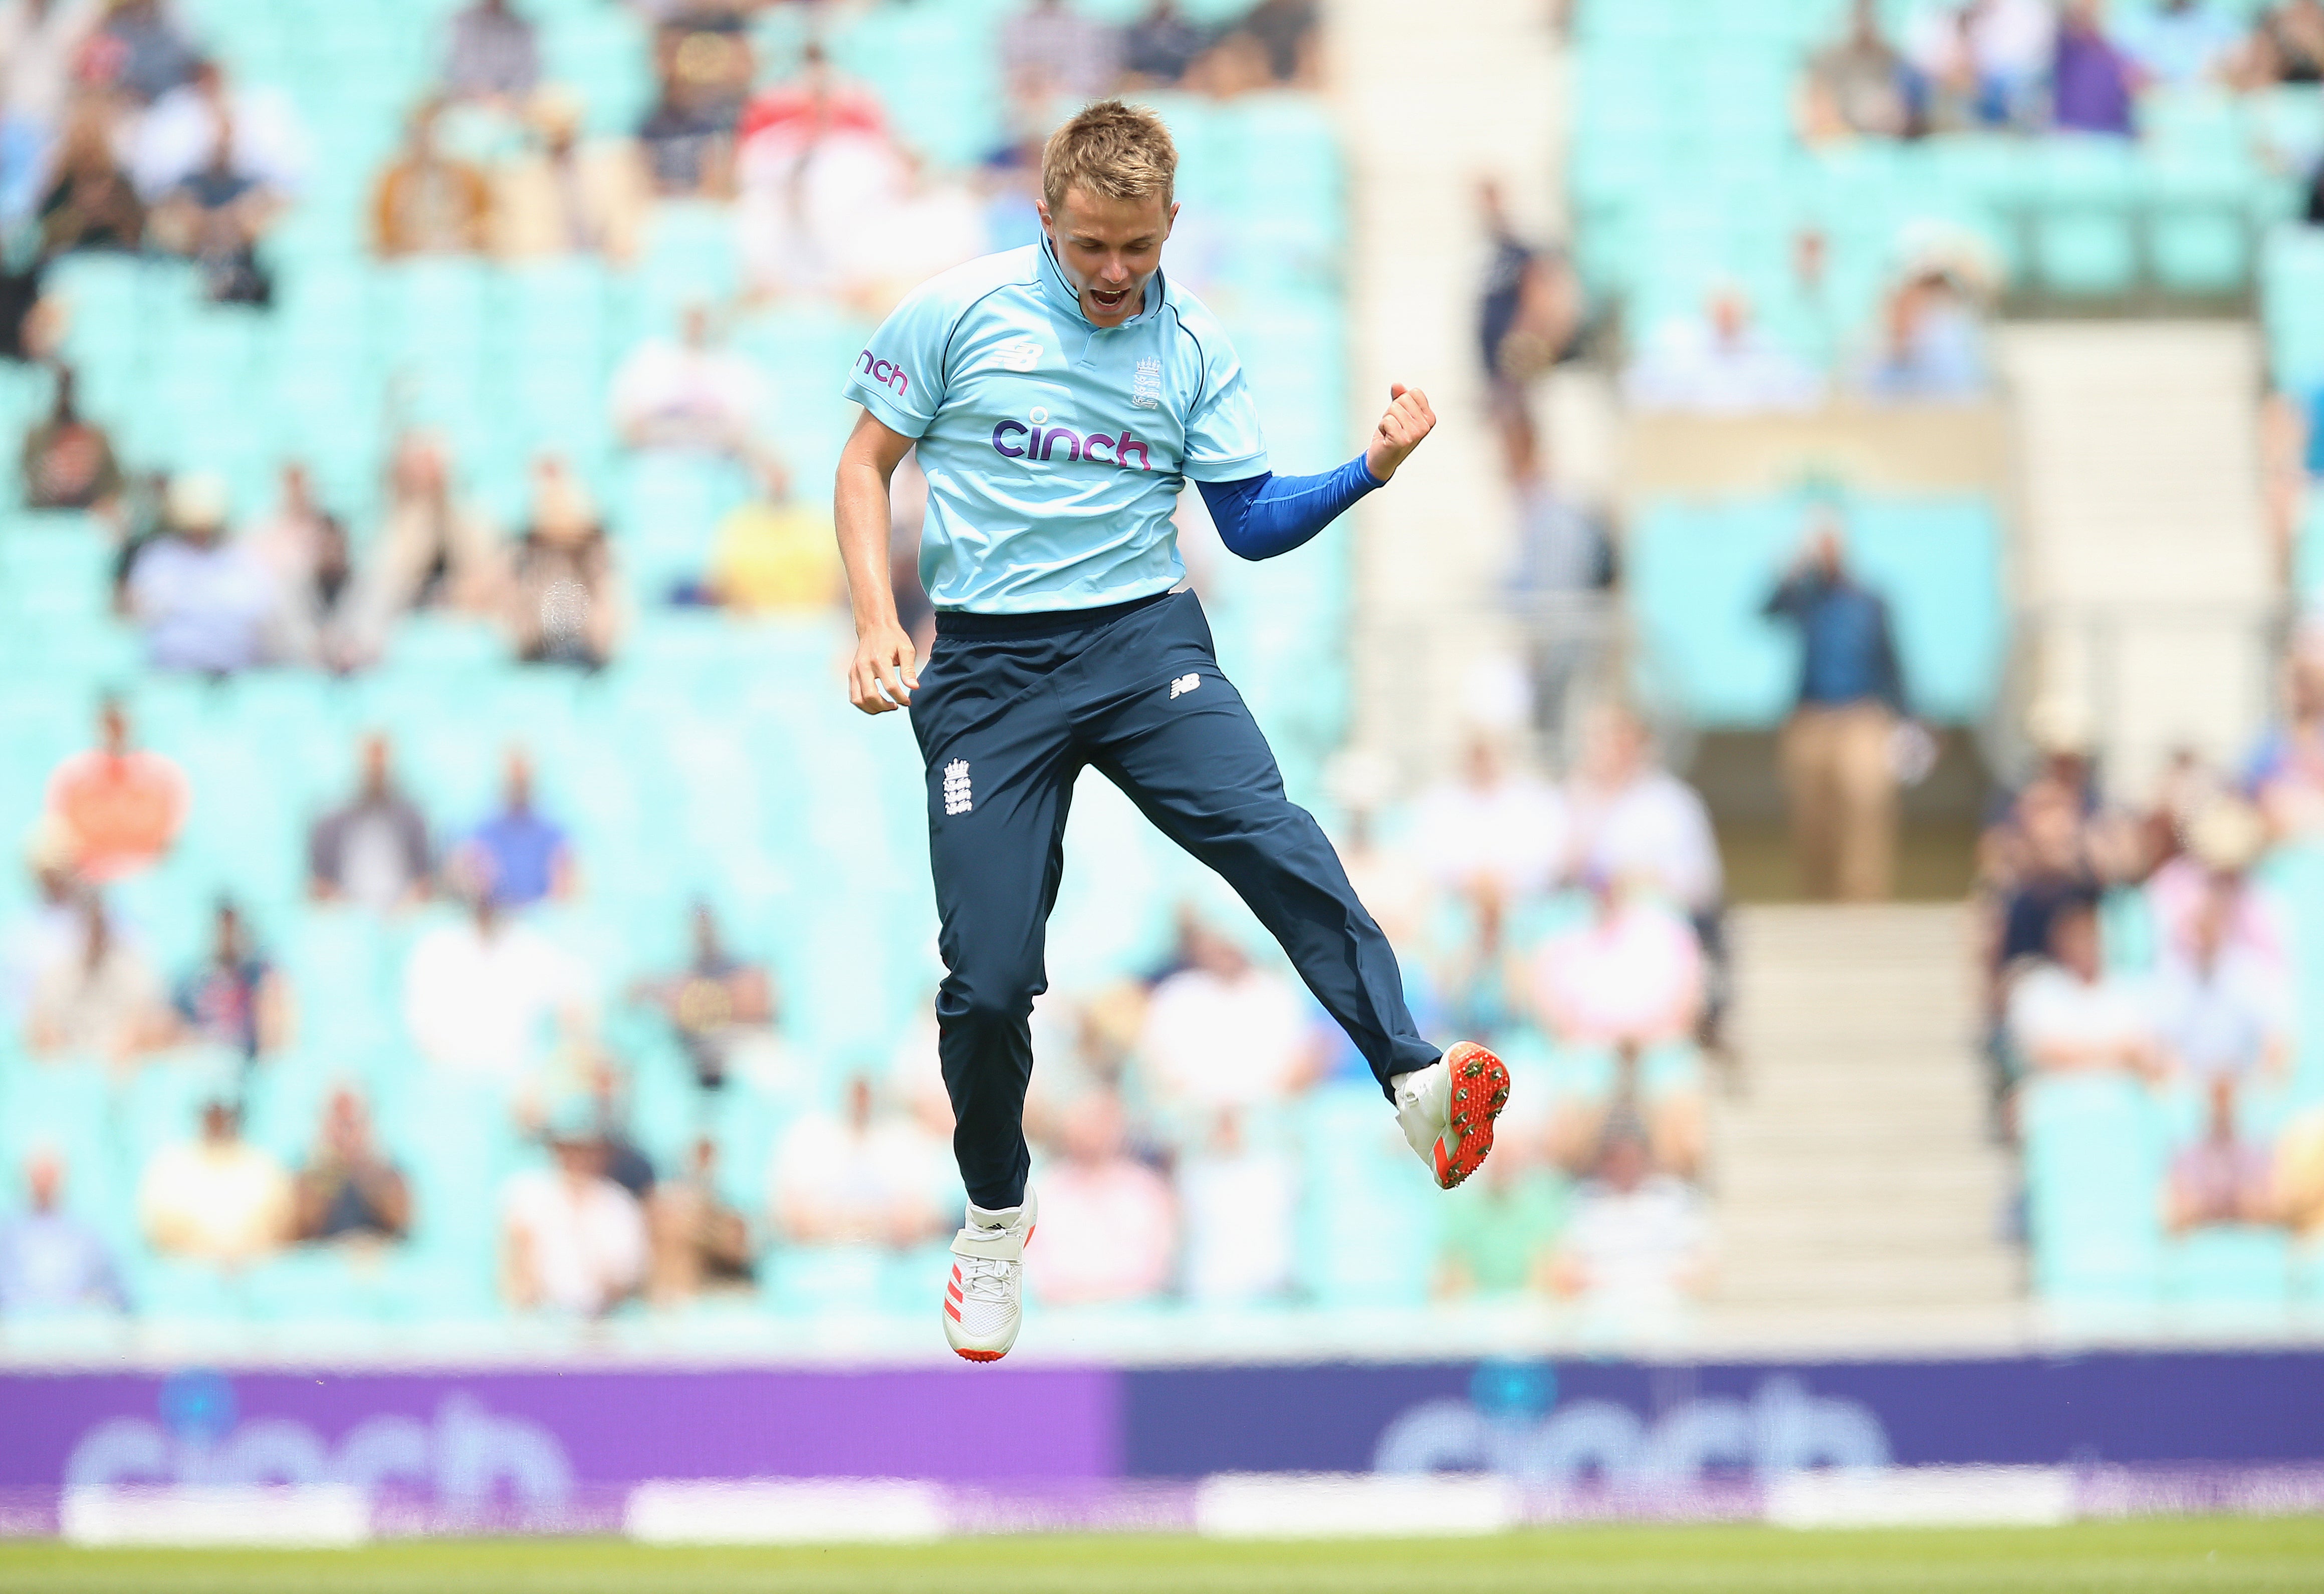 England’s Sam Curran celebrates one of his five wickets